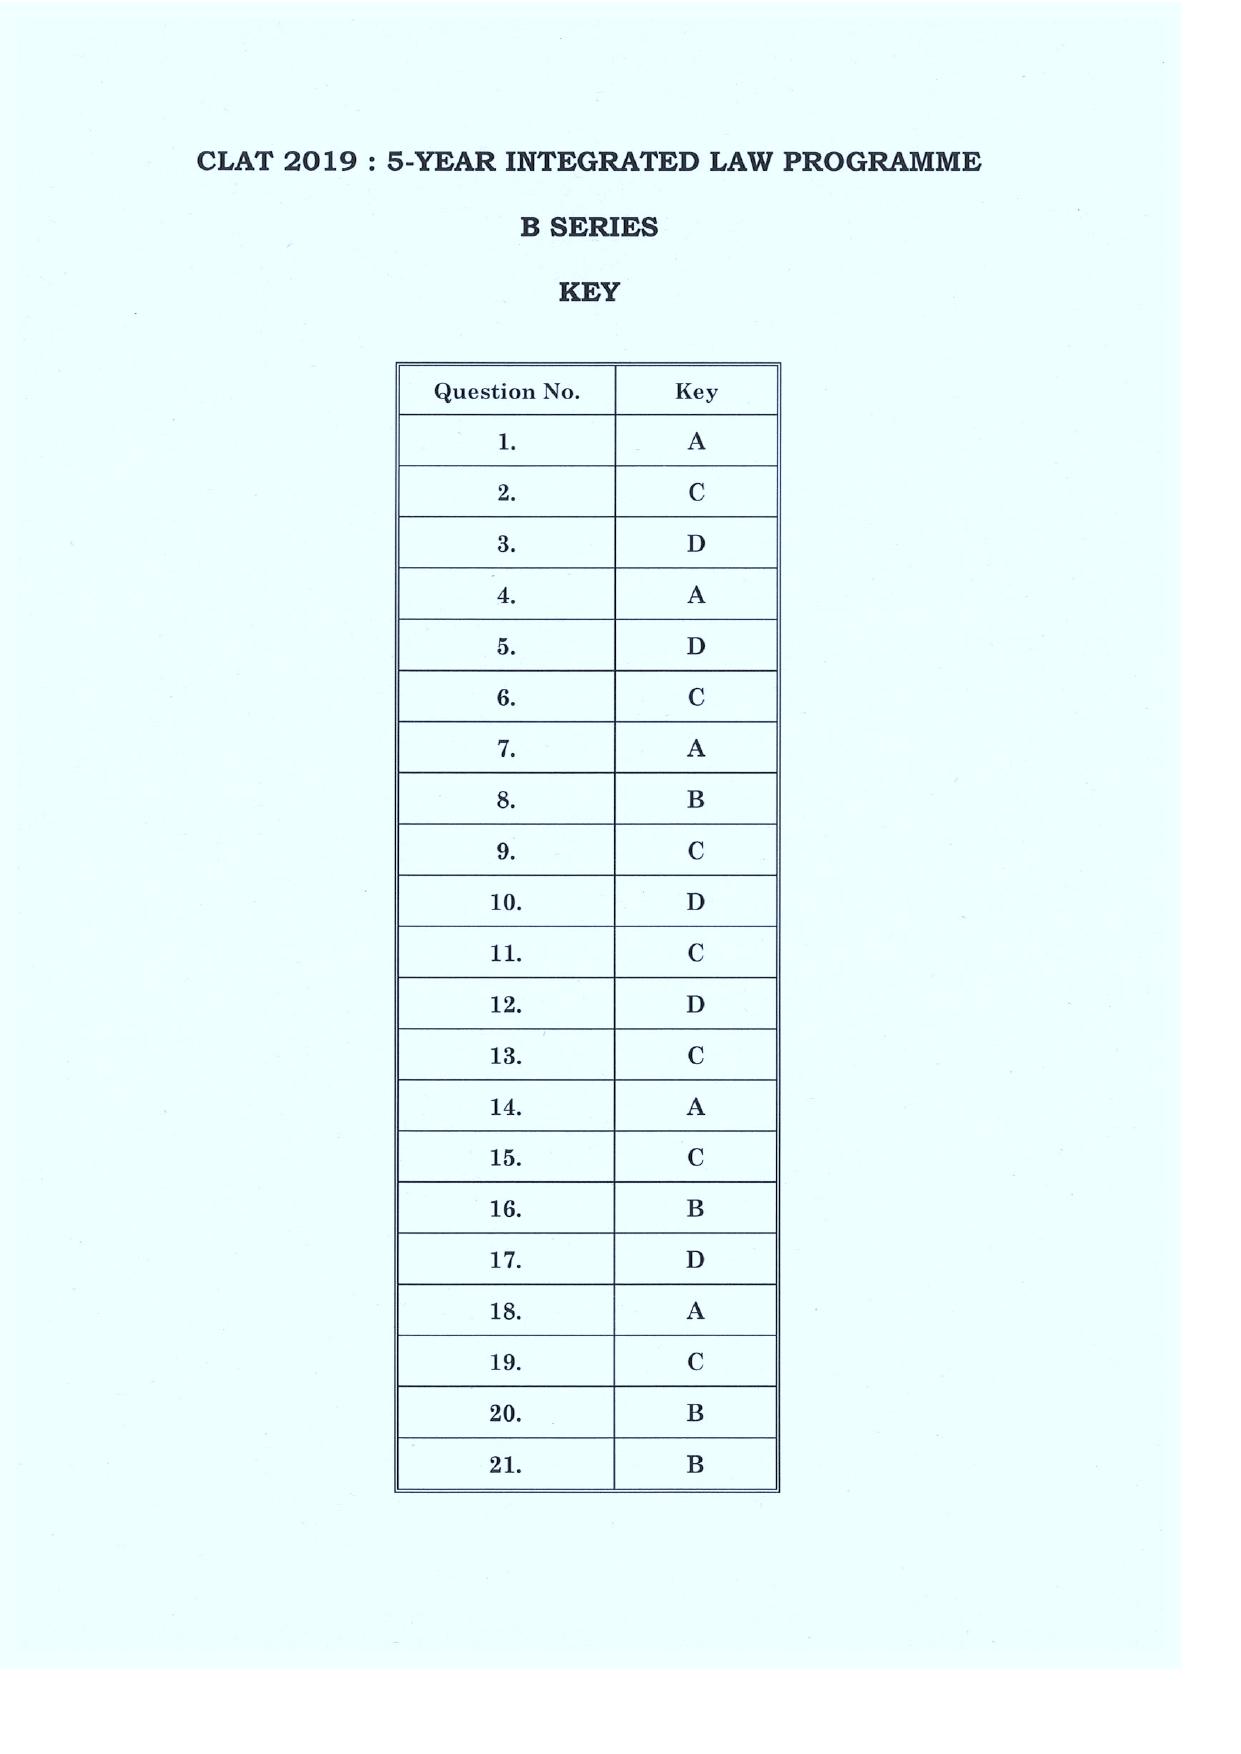 CLAT 2019 PG A-Series Answer Key - Page 1